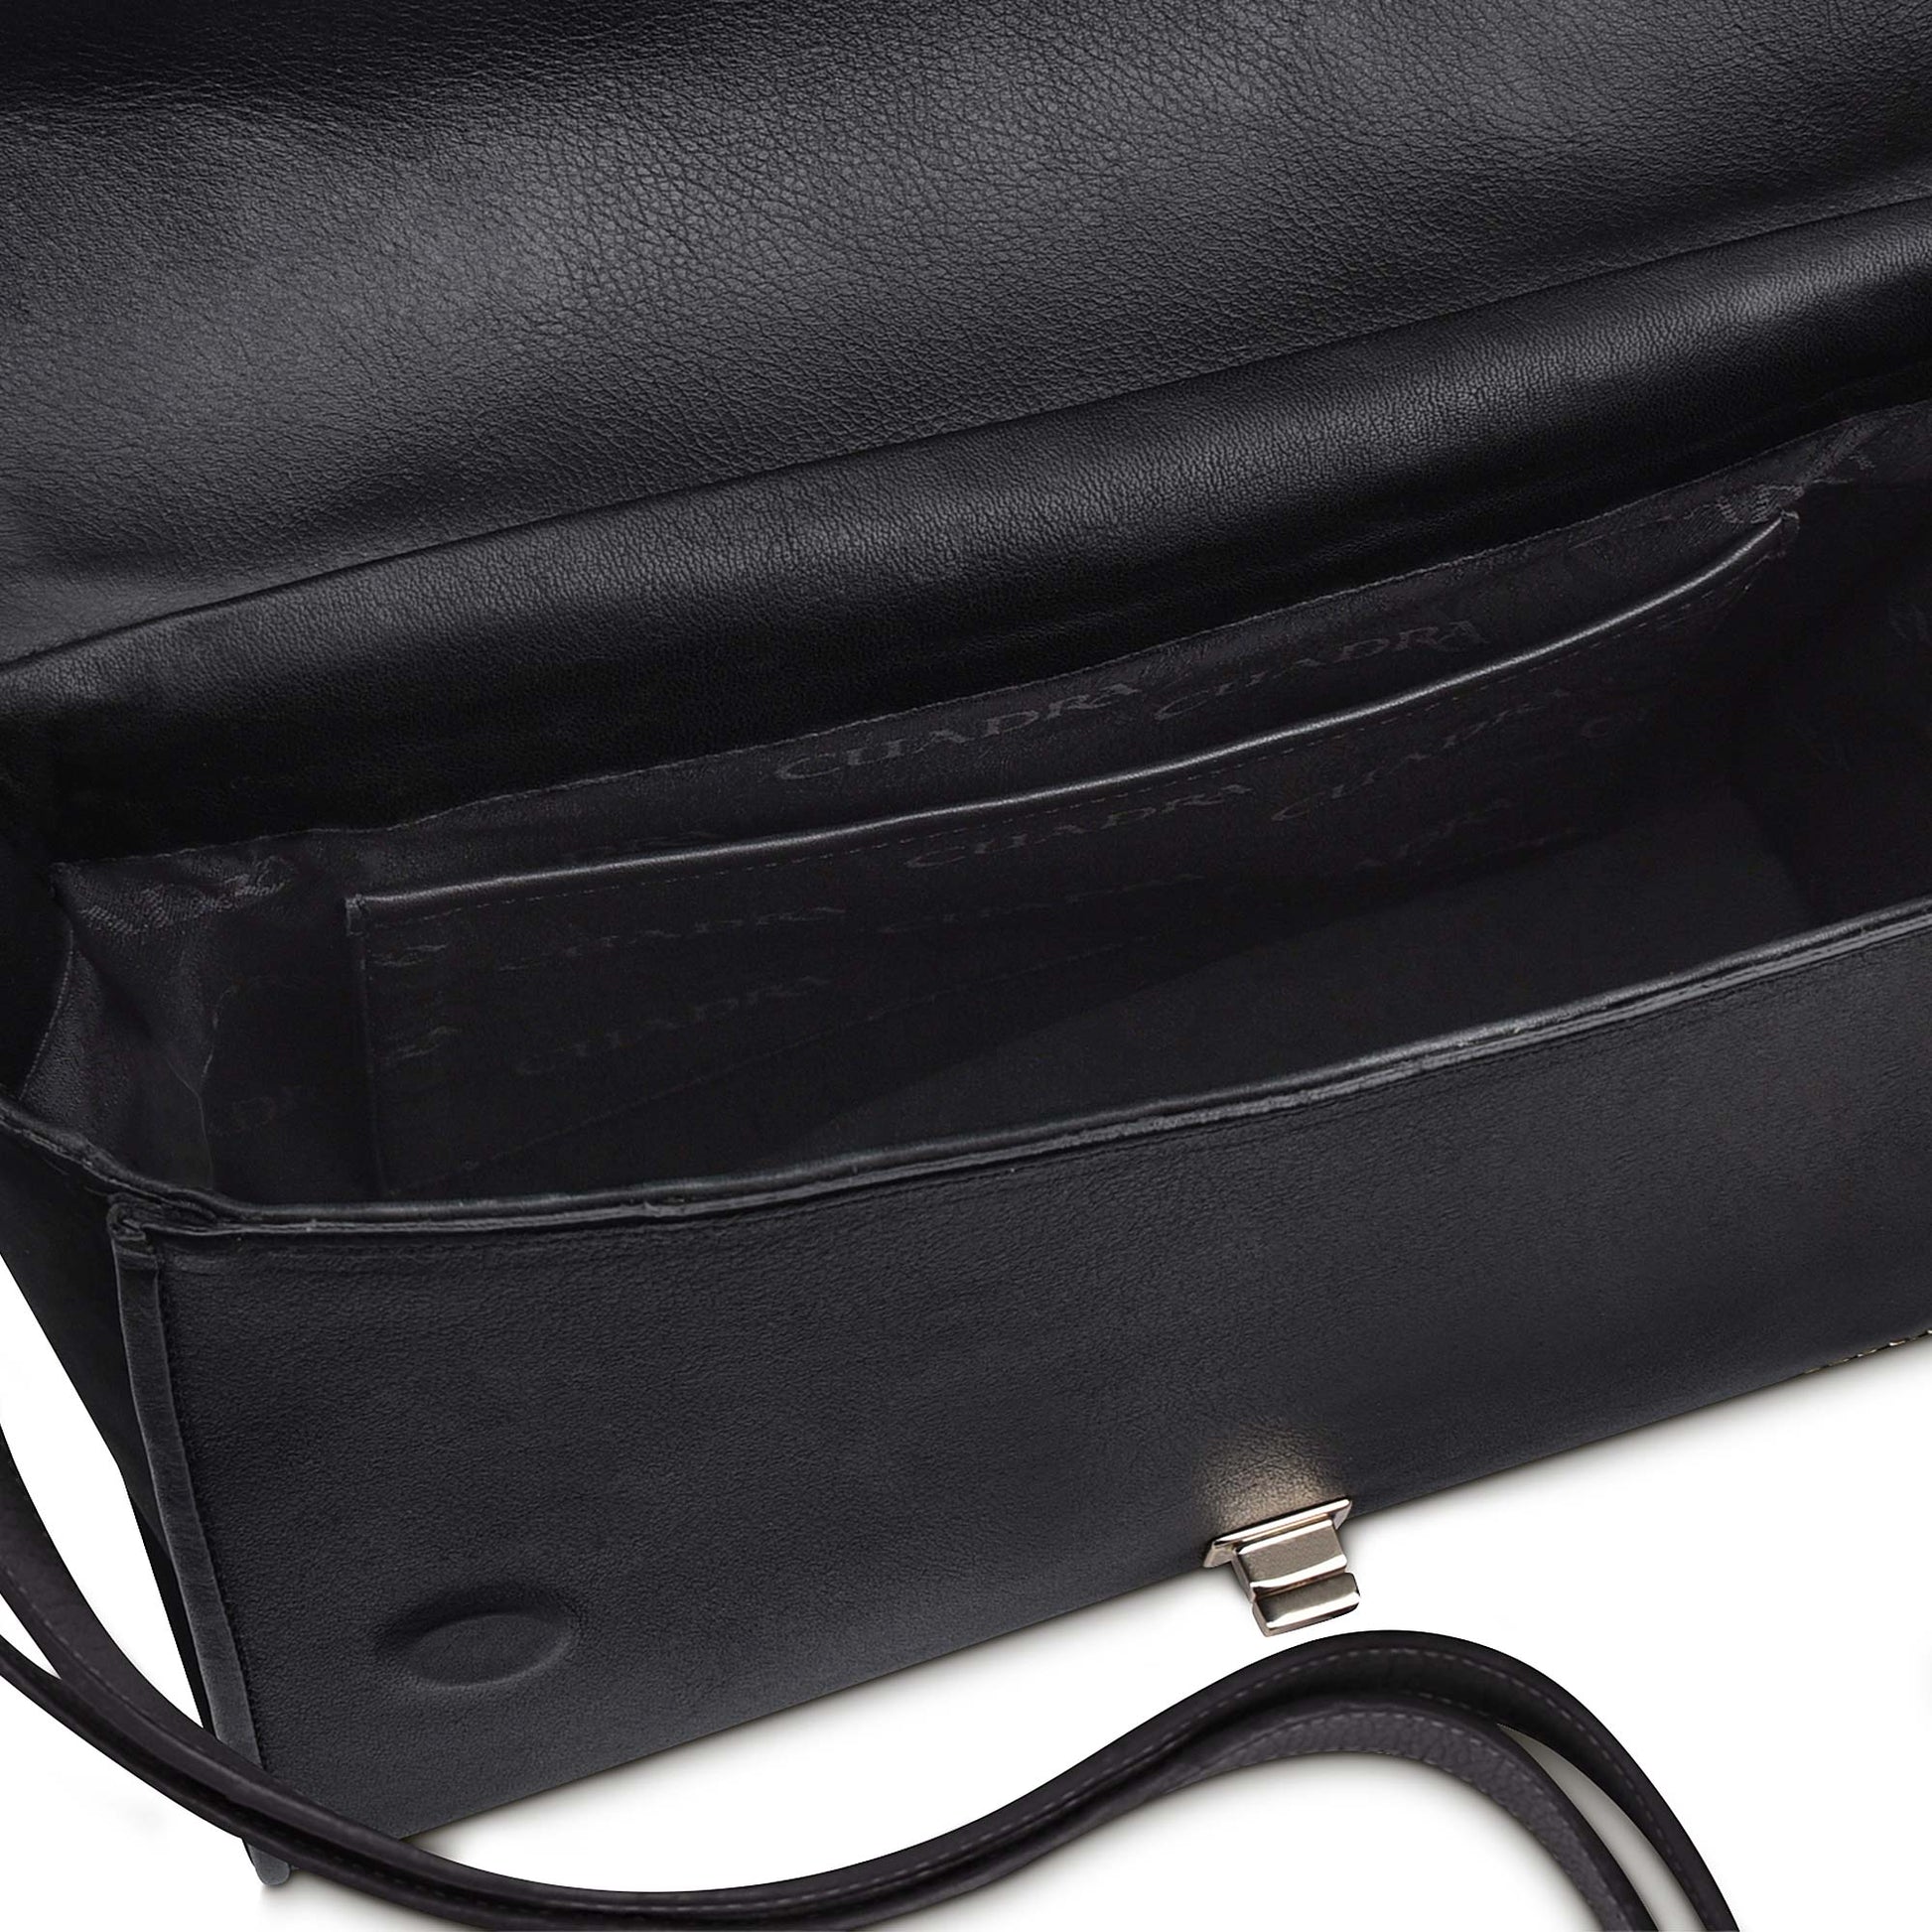 the leather bag has an inner small compartment, perfect for cards or cash